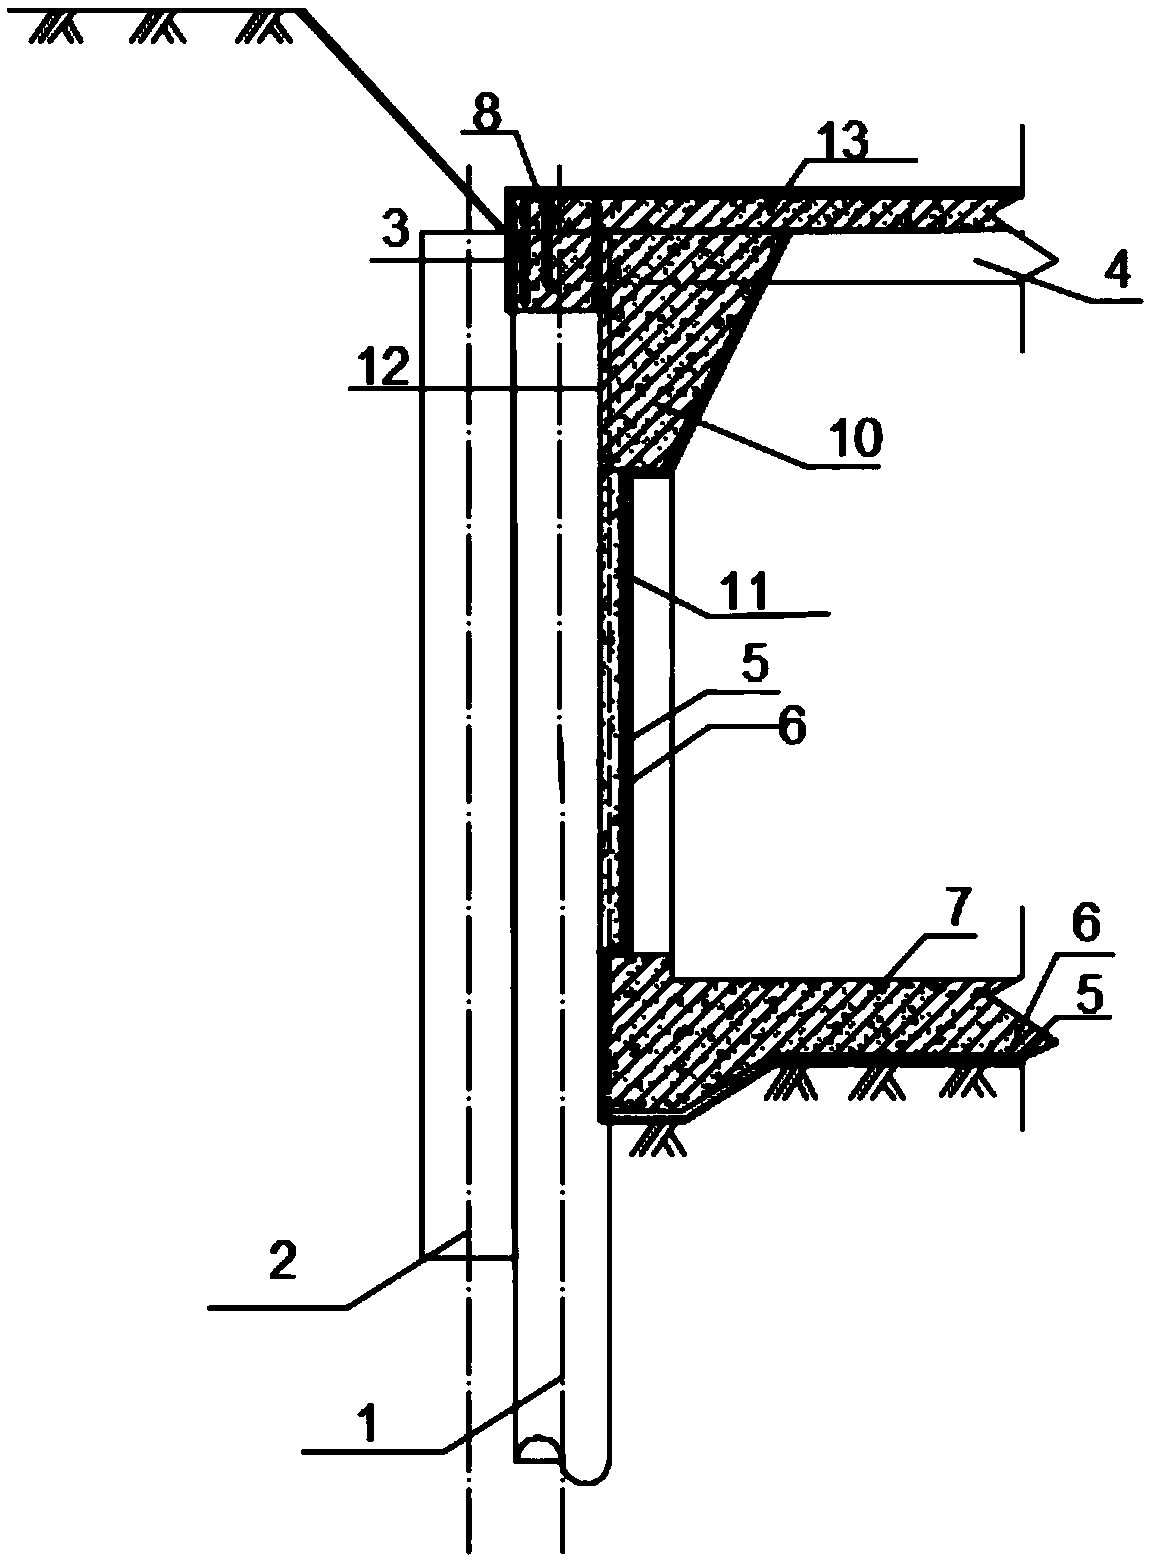 Support and pipe rack structure integrated system and construction method